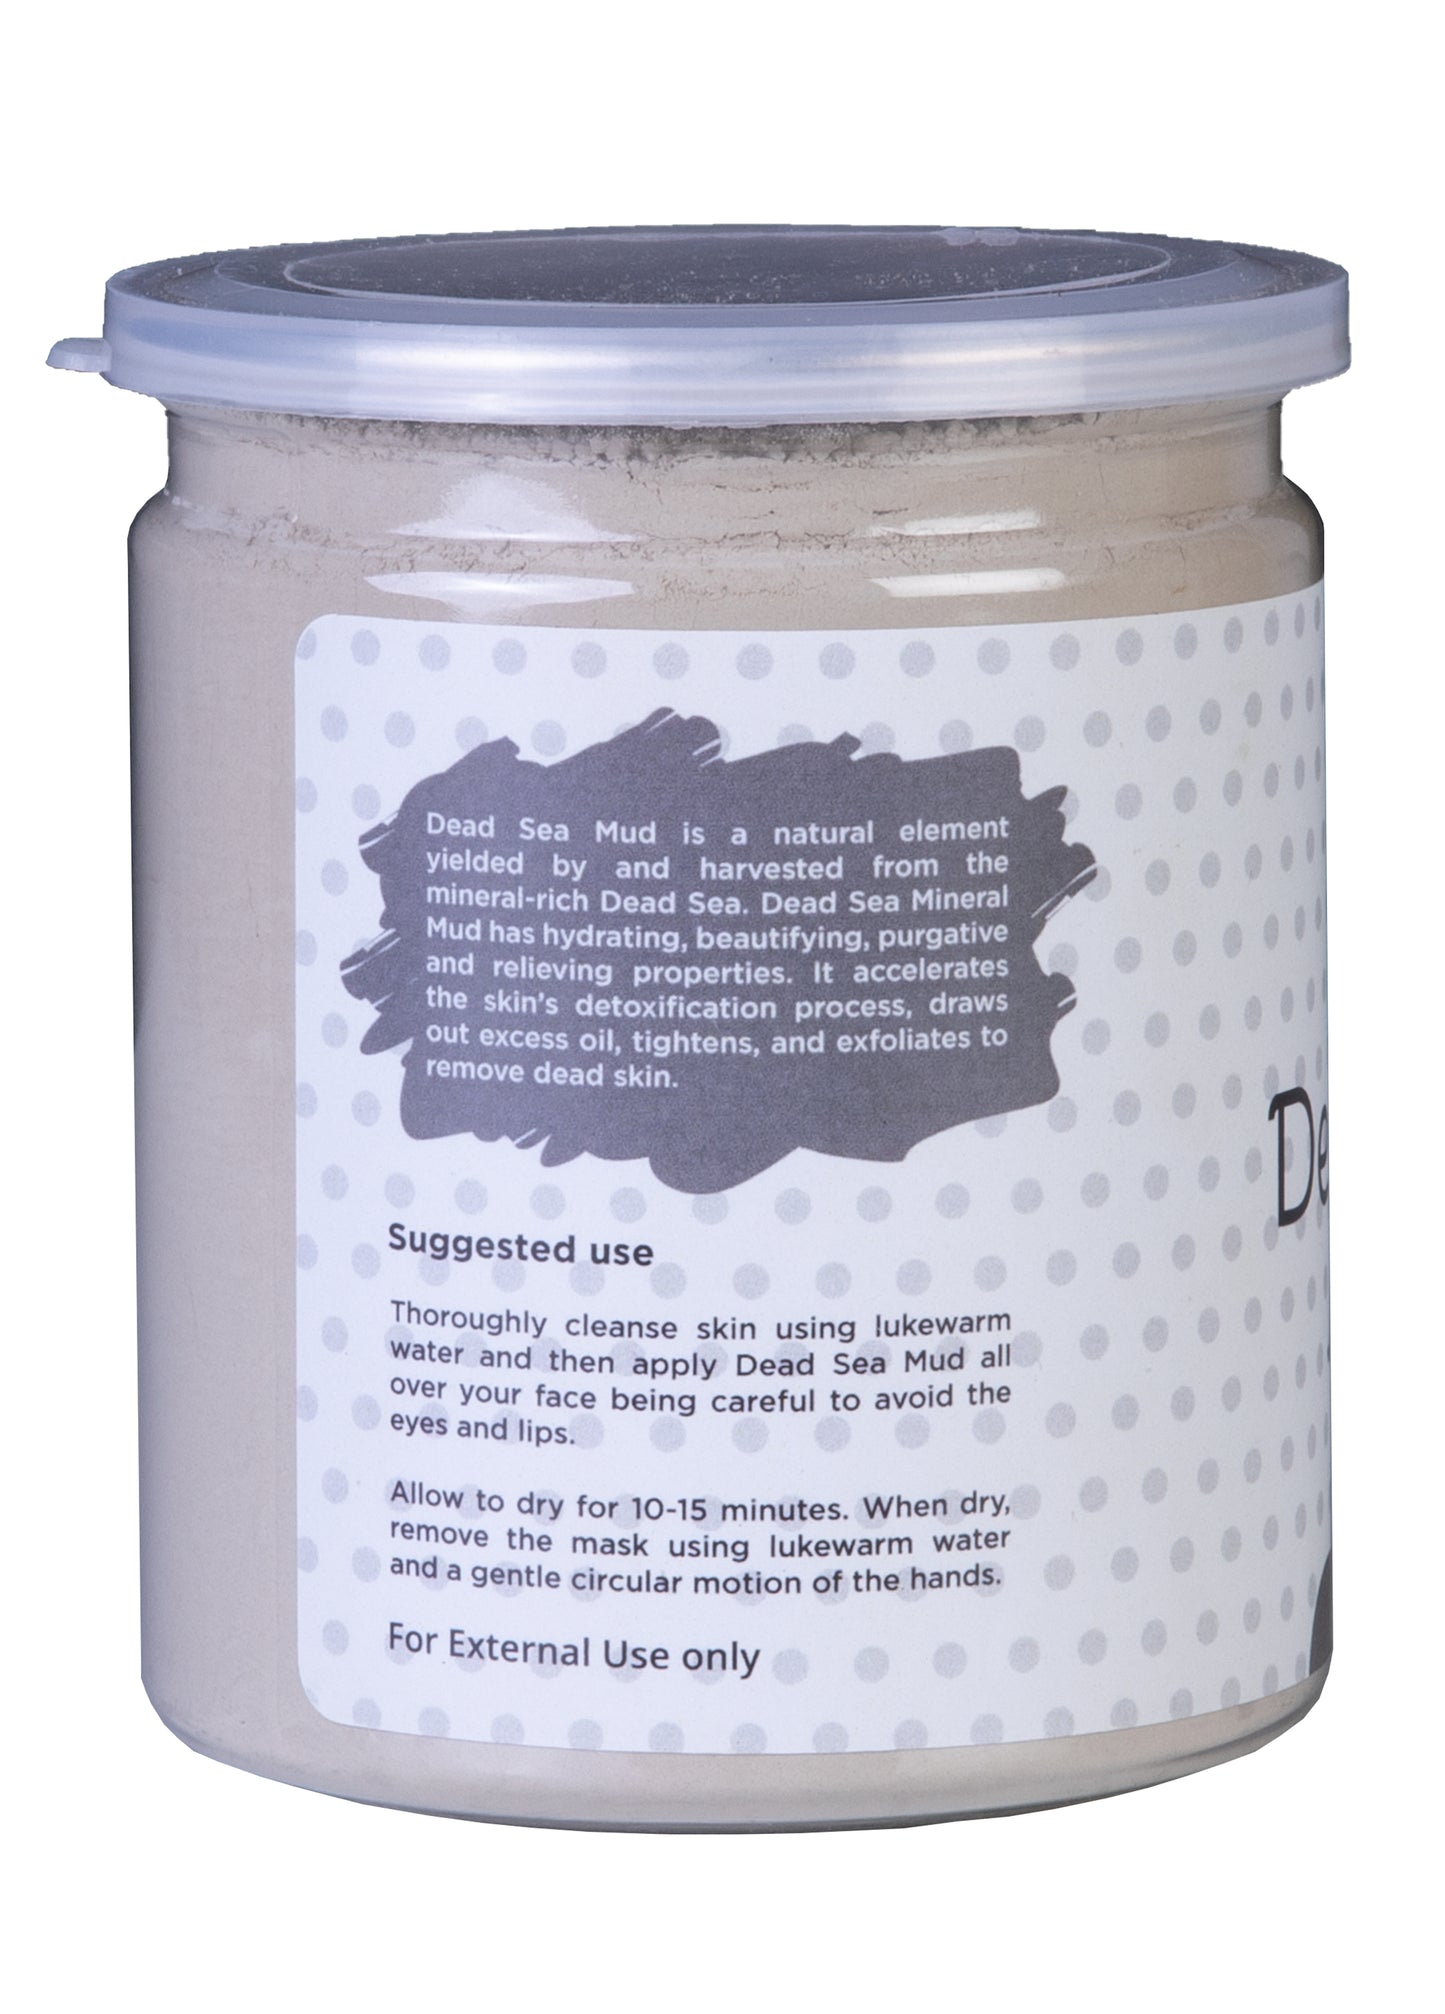 Dead Sea Mud 1 Pound | Detoxifies and Exfoliates The Skin | 100% Pure and 100% Natural | Clears Acne, Dark Spots & Anti-Aging | Yogi's Gift®